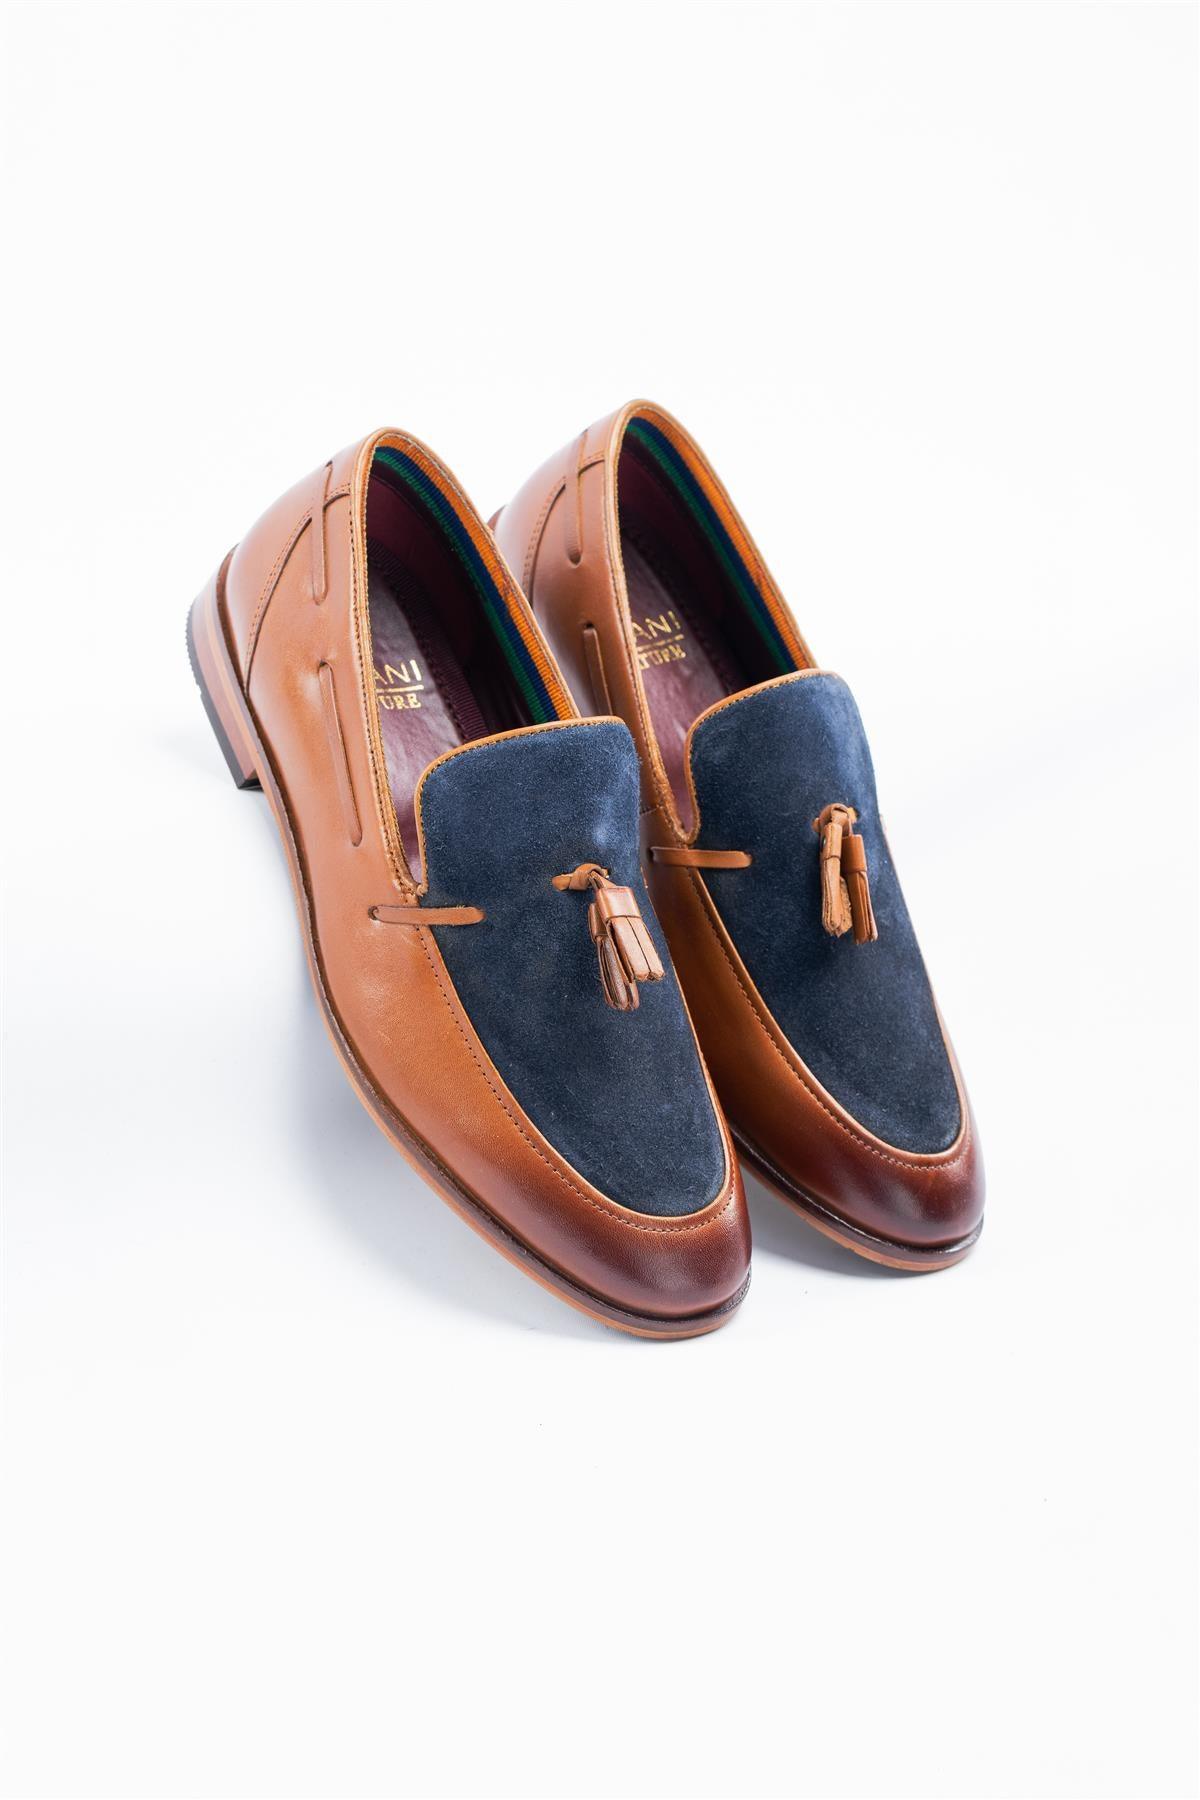 Freemont tan/navy loafers front